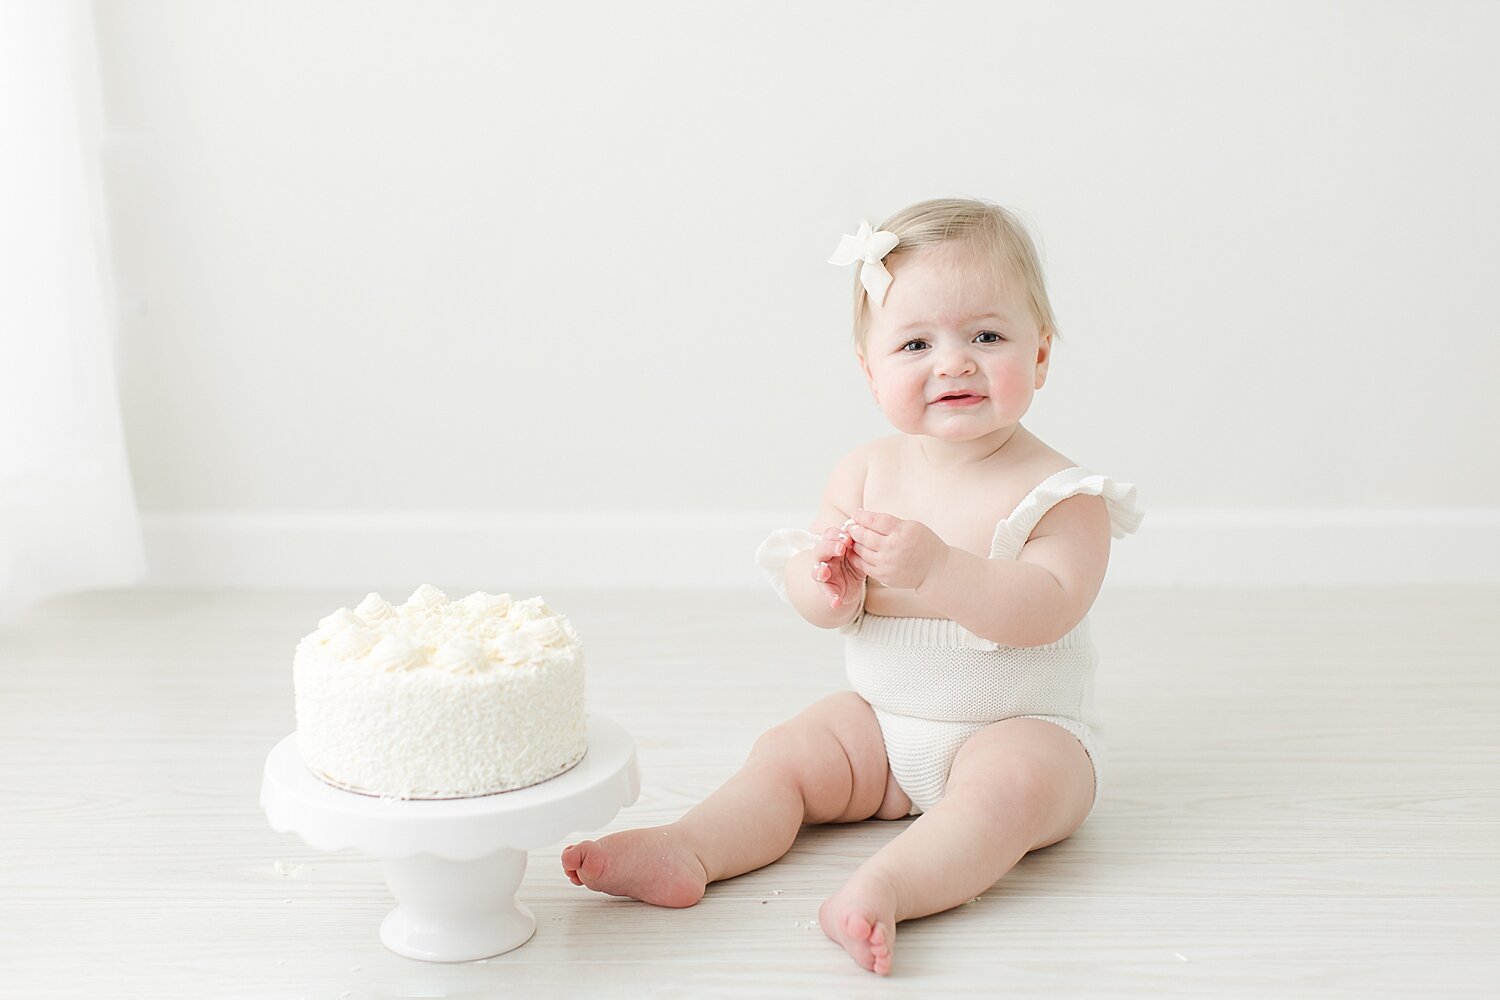 First birthday cake smash in studio in Darien, CT. Photo by Kristin Wood Photography.